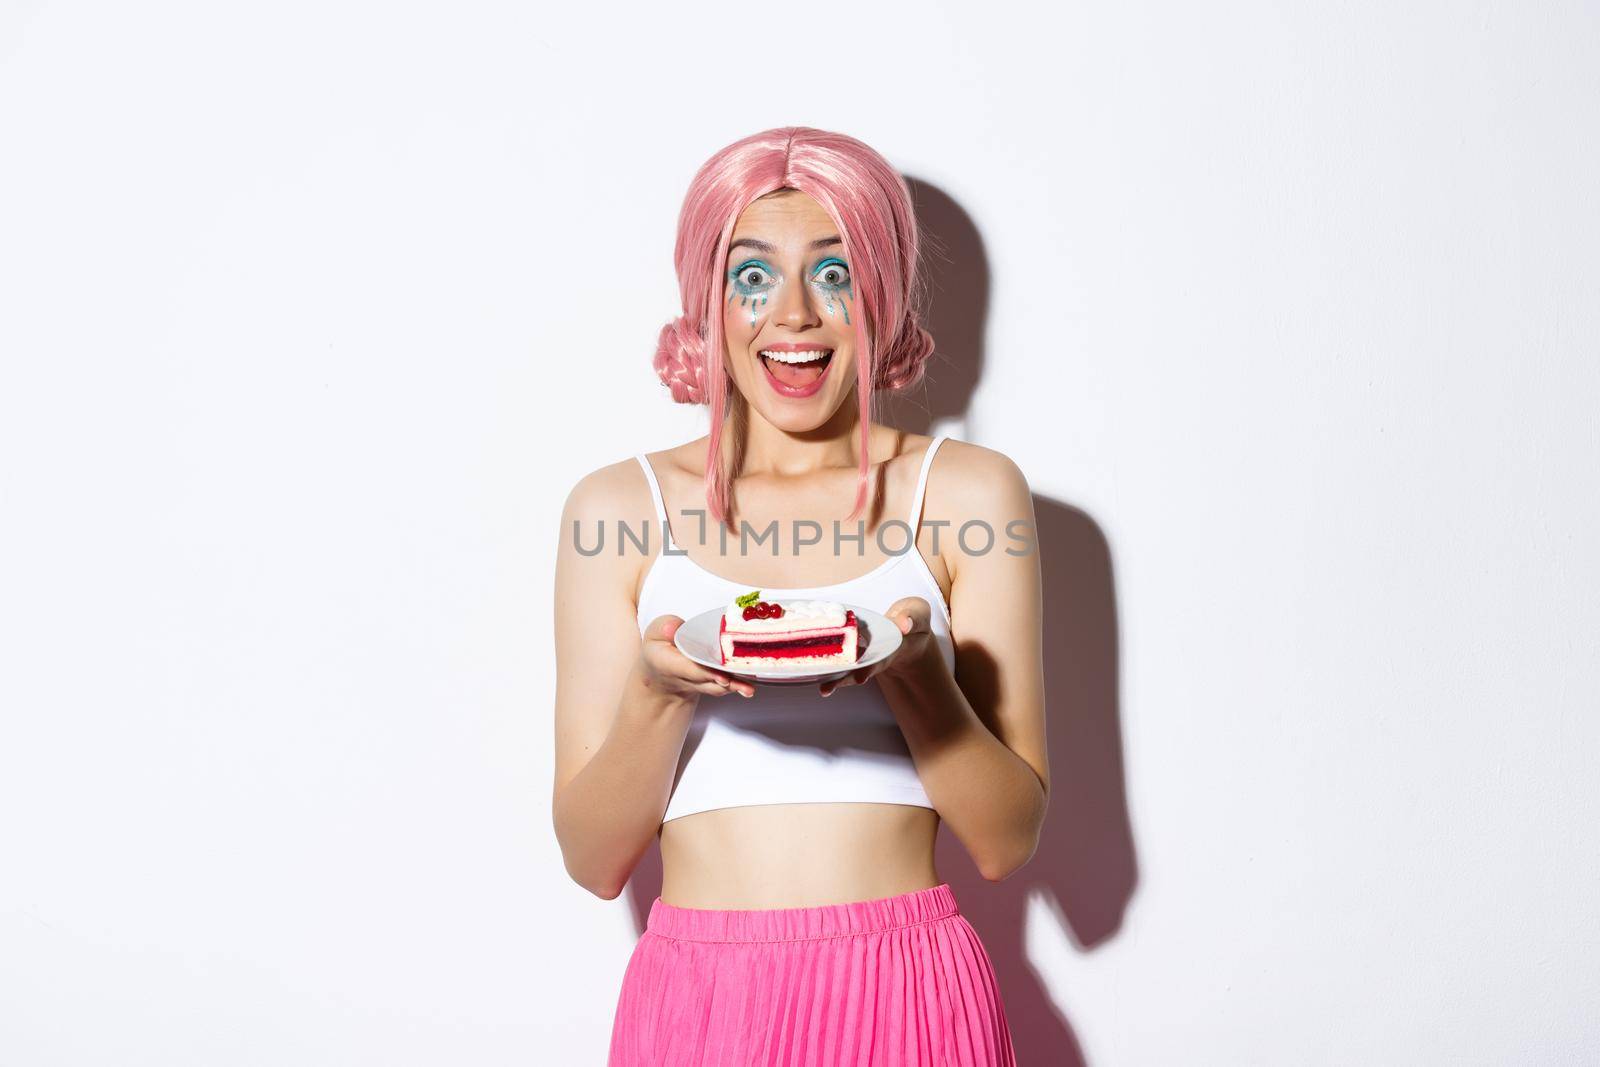 Portrait of excited birthday girl celebrating, wearing pink wig, holding b-day cake and smiling happy, standing over white background.